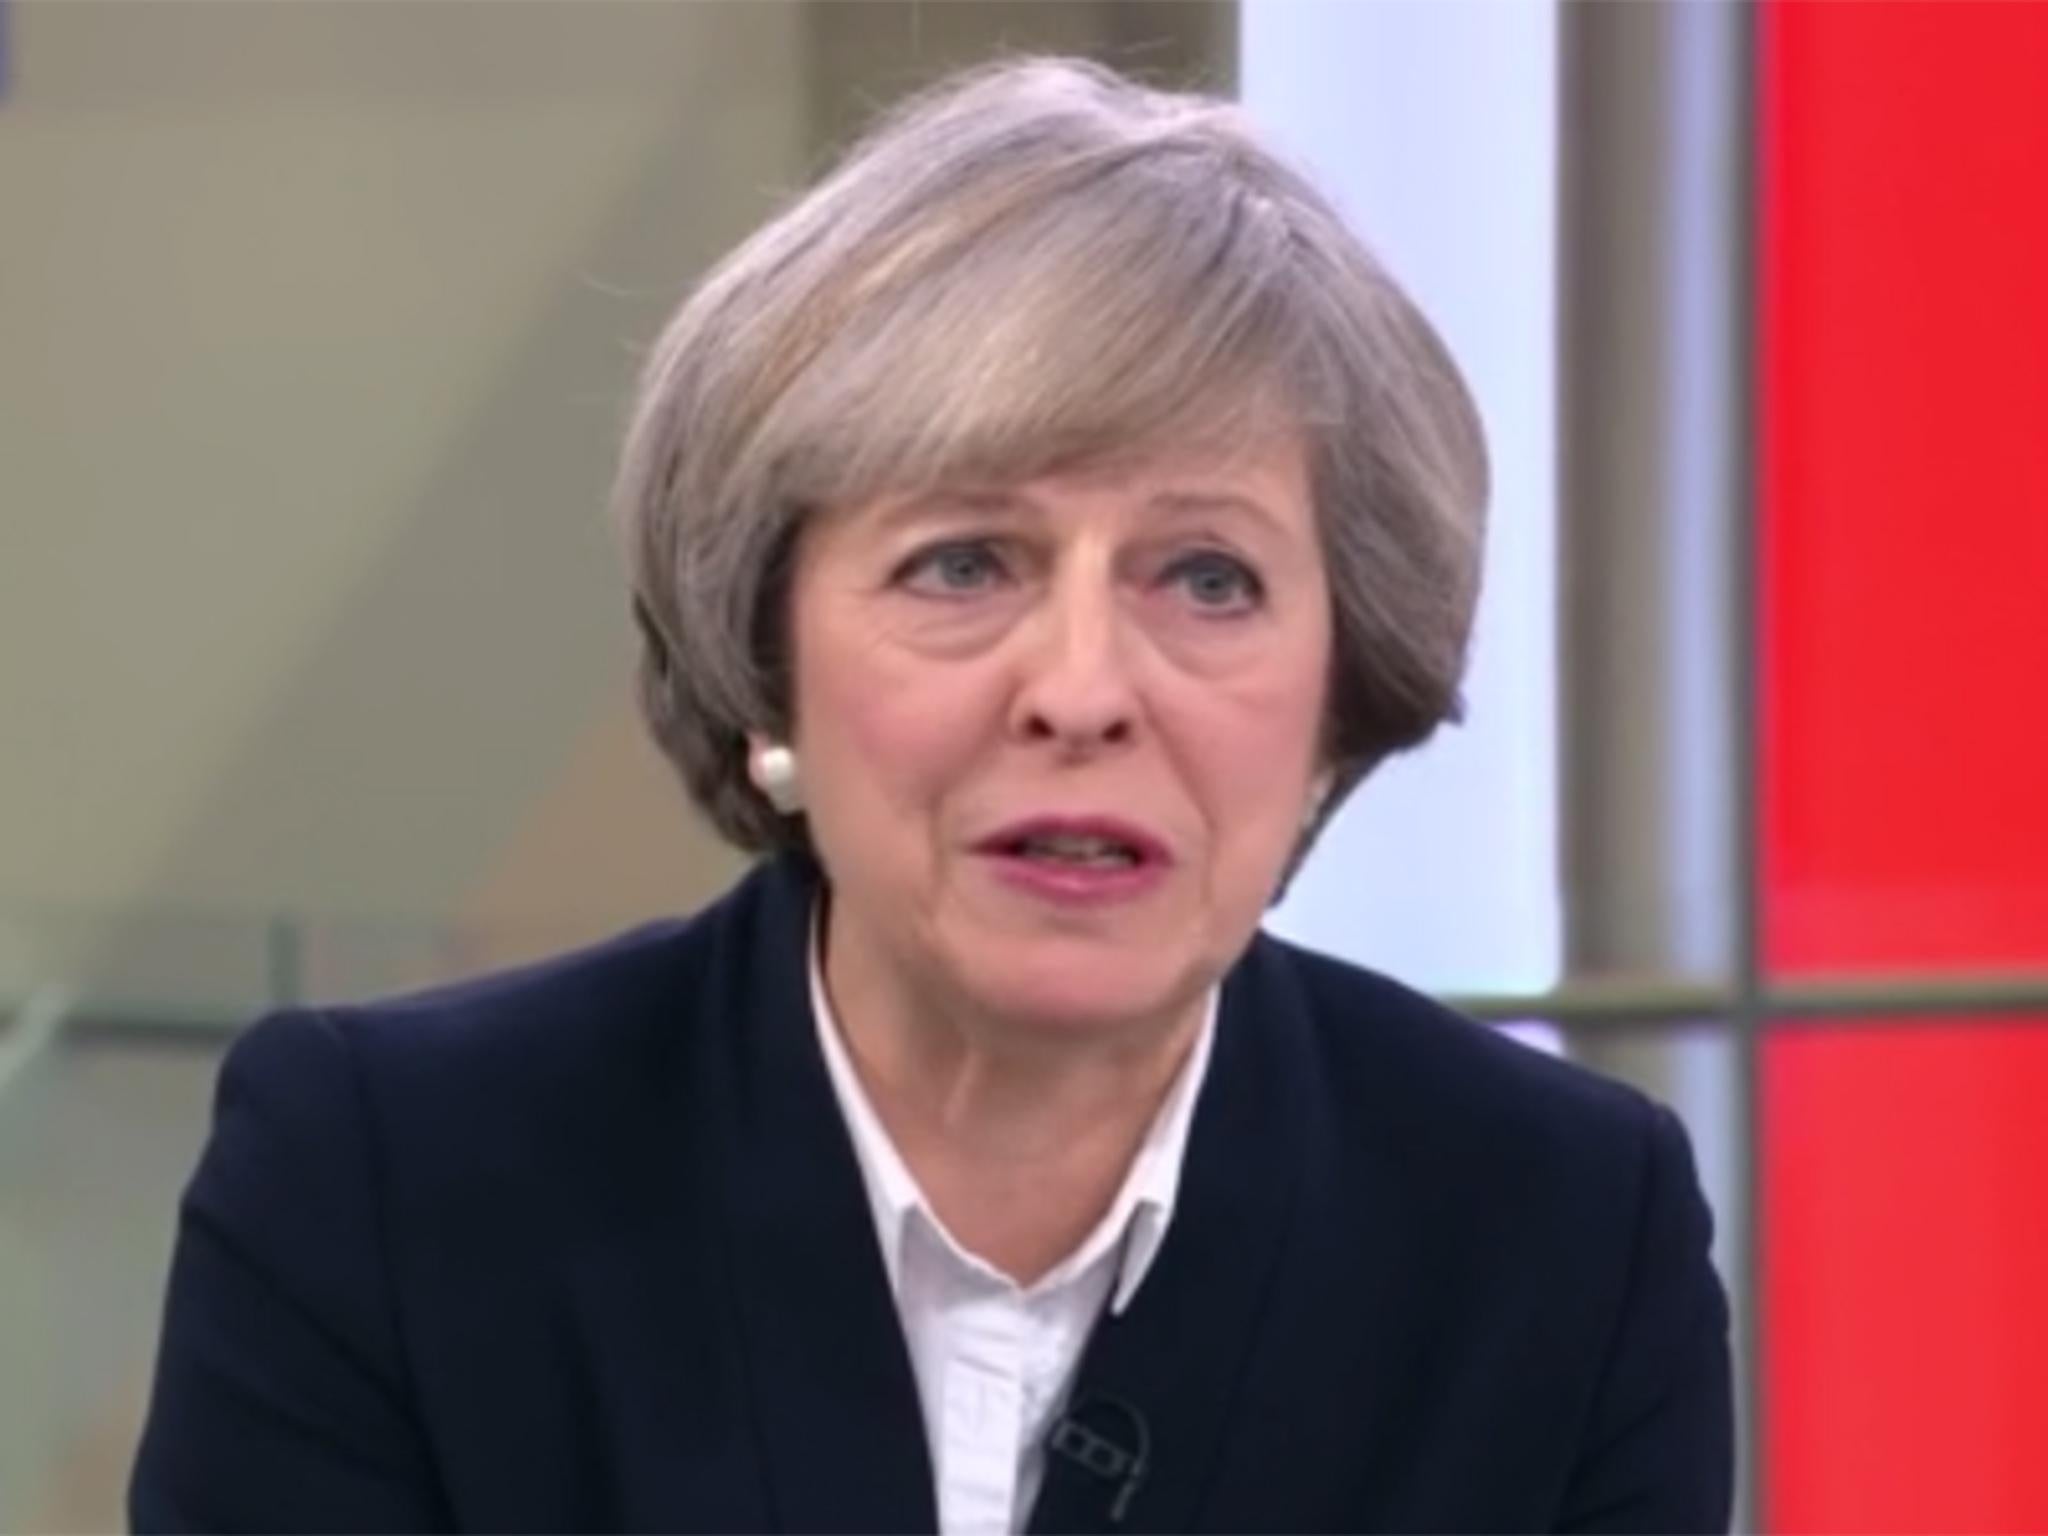 Theresa May said America would support Nato despite Donald Trump suggesting otherwise